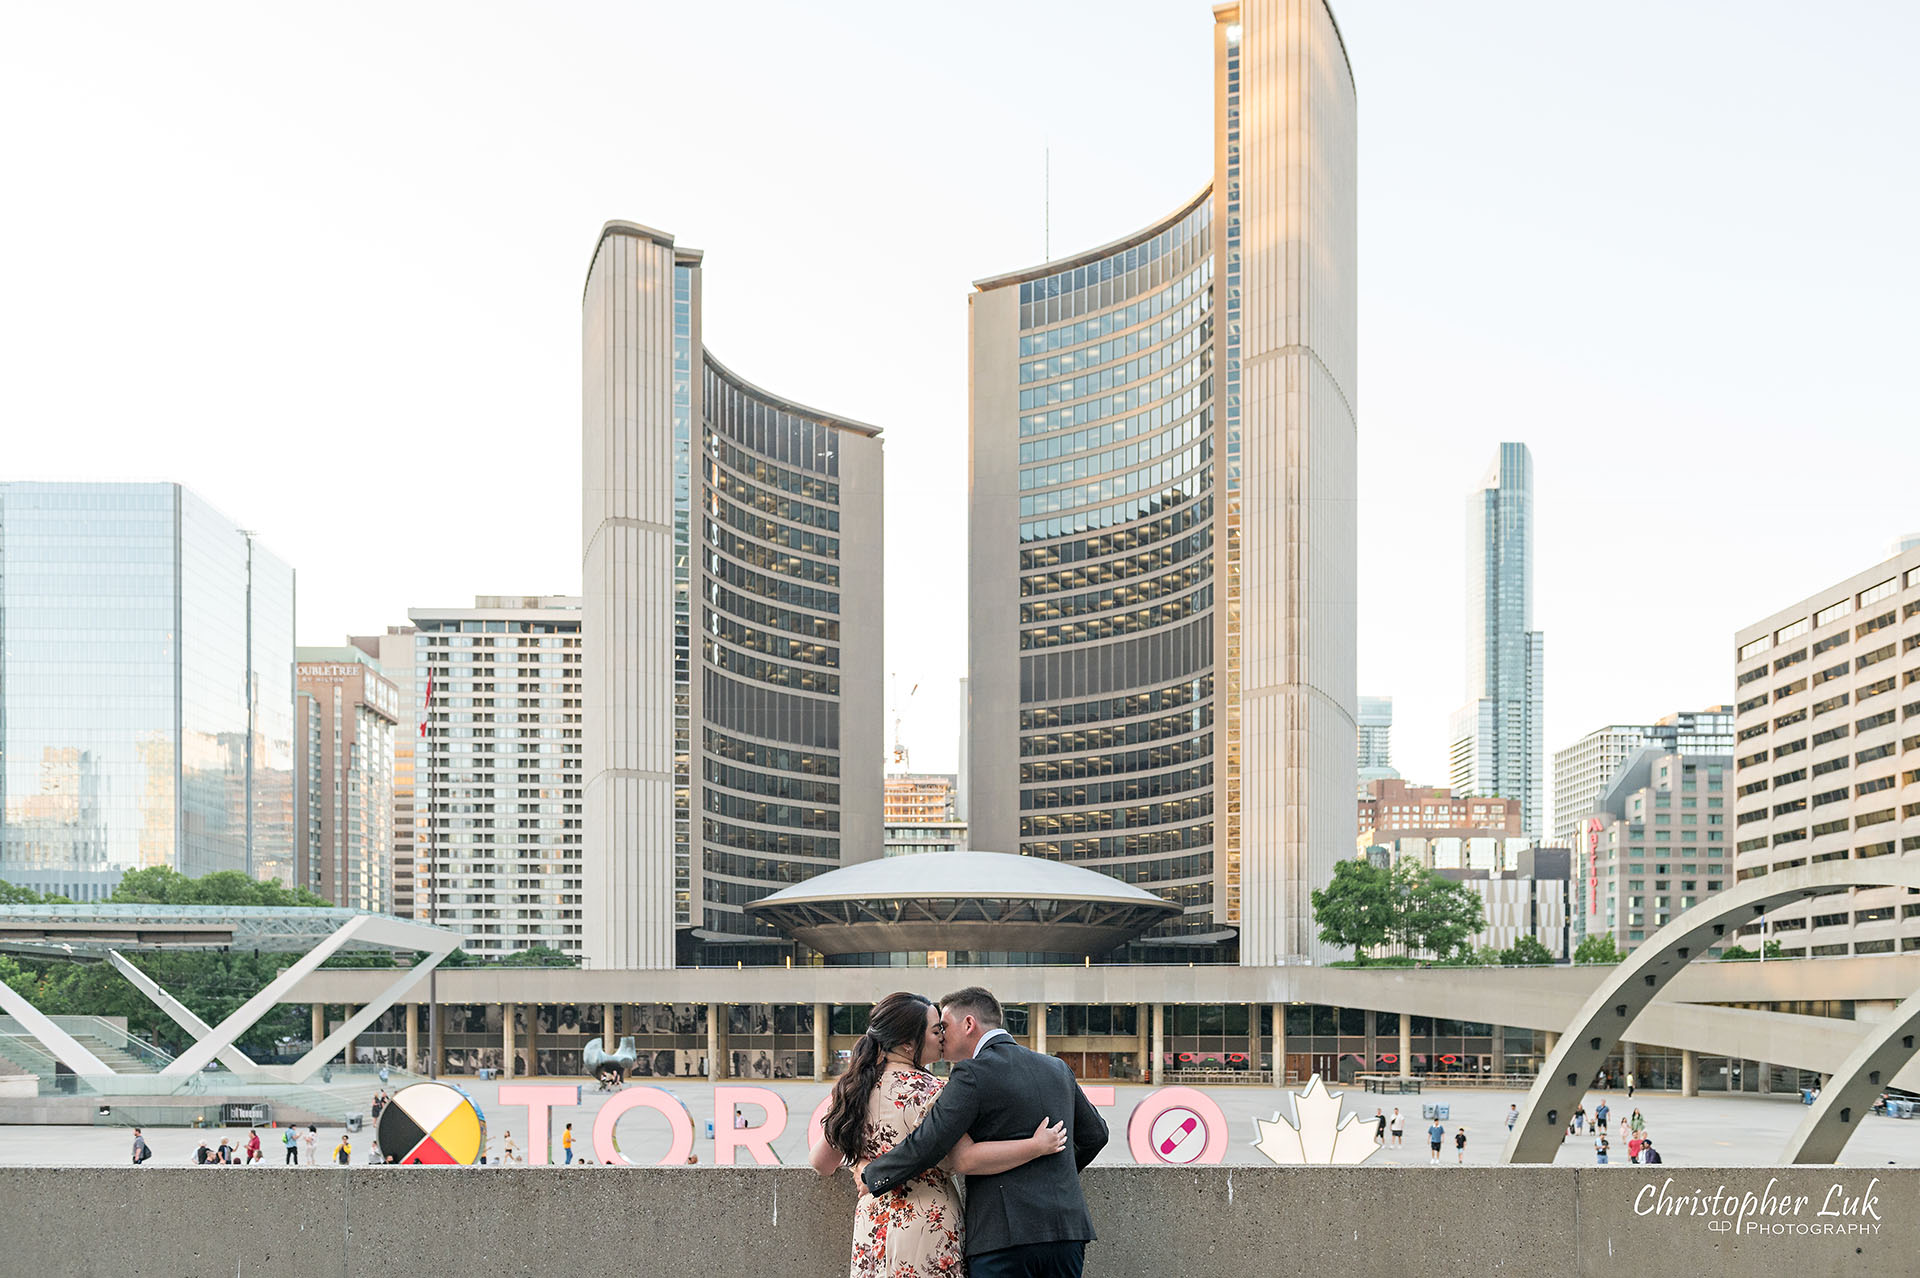 Christopher Luk Toronto Wedding Photographer Engagement Photos Pictures Session Osgoode Hall Nathan Philips Square City Hall Waterfall 3D Sign Bride Groom Kiss Sunset Landscape